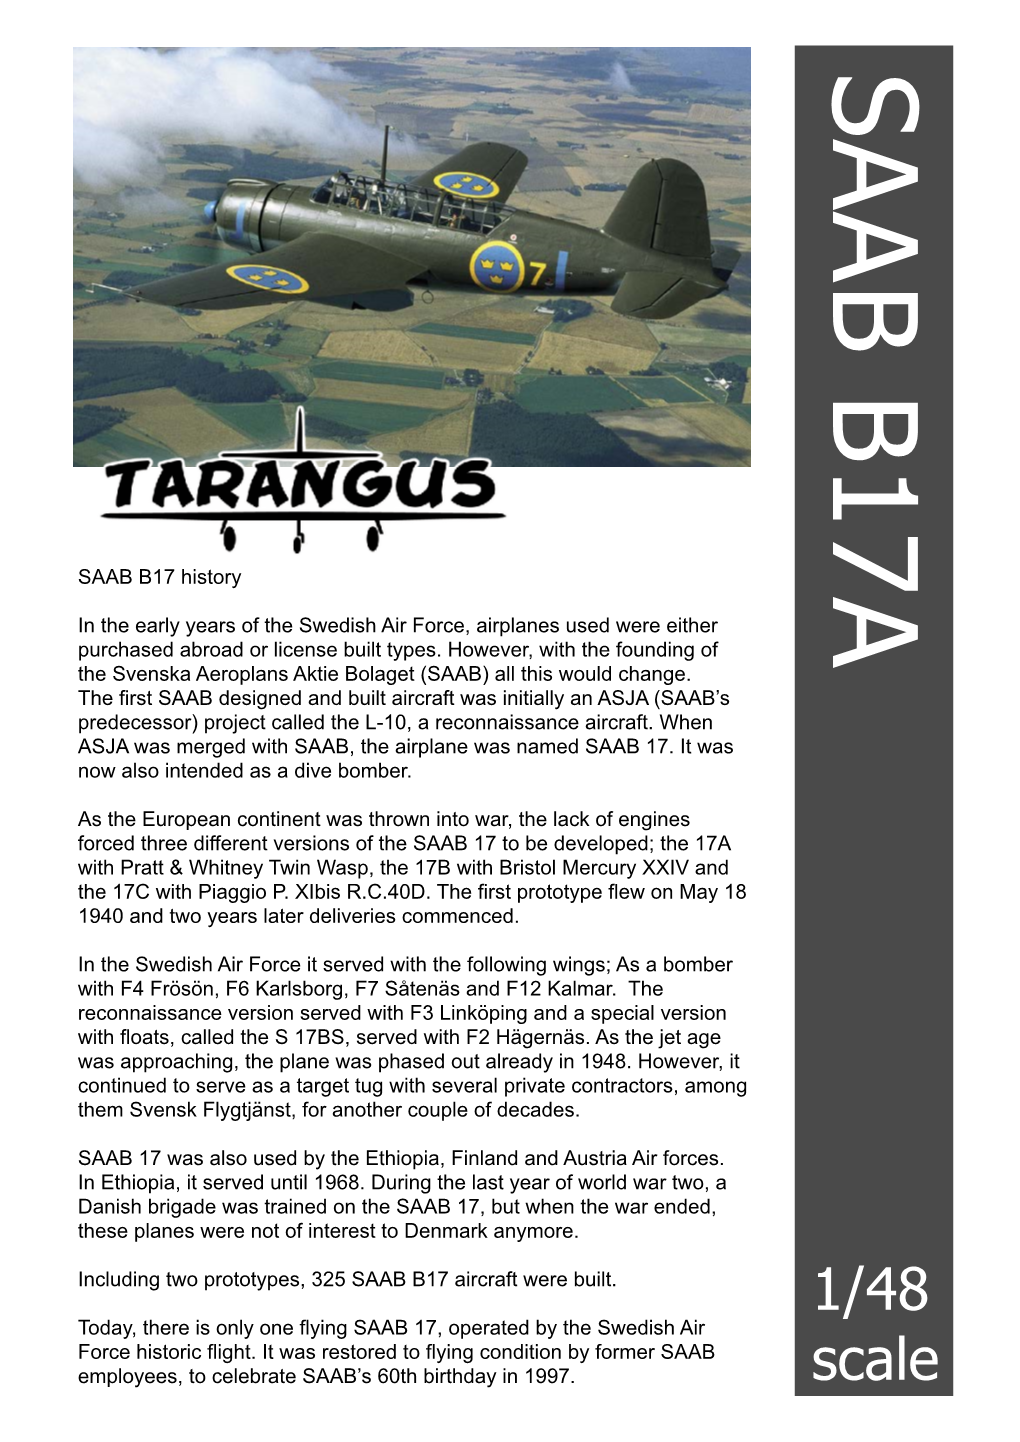 SAAB B17A 1/48 Scale Employees, to Celebrate SAAB’S 60Th Birthday in 1997